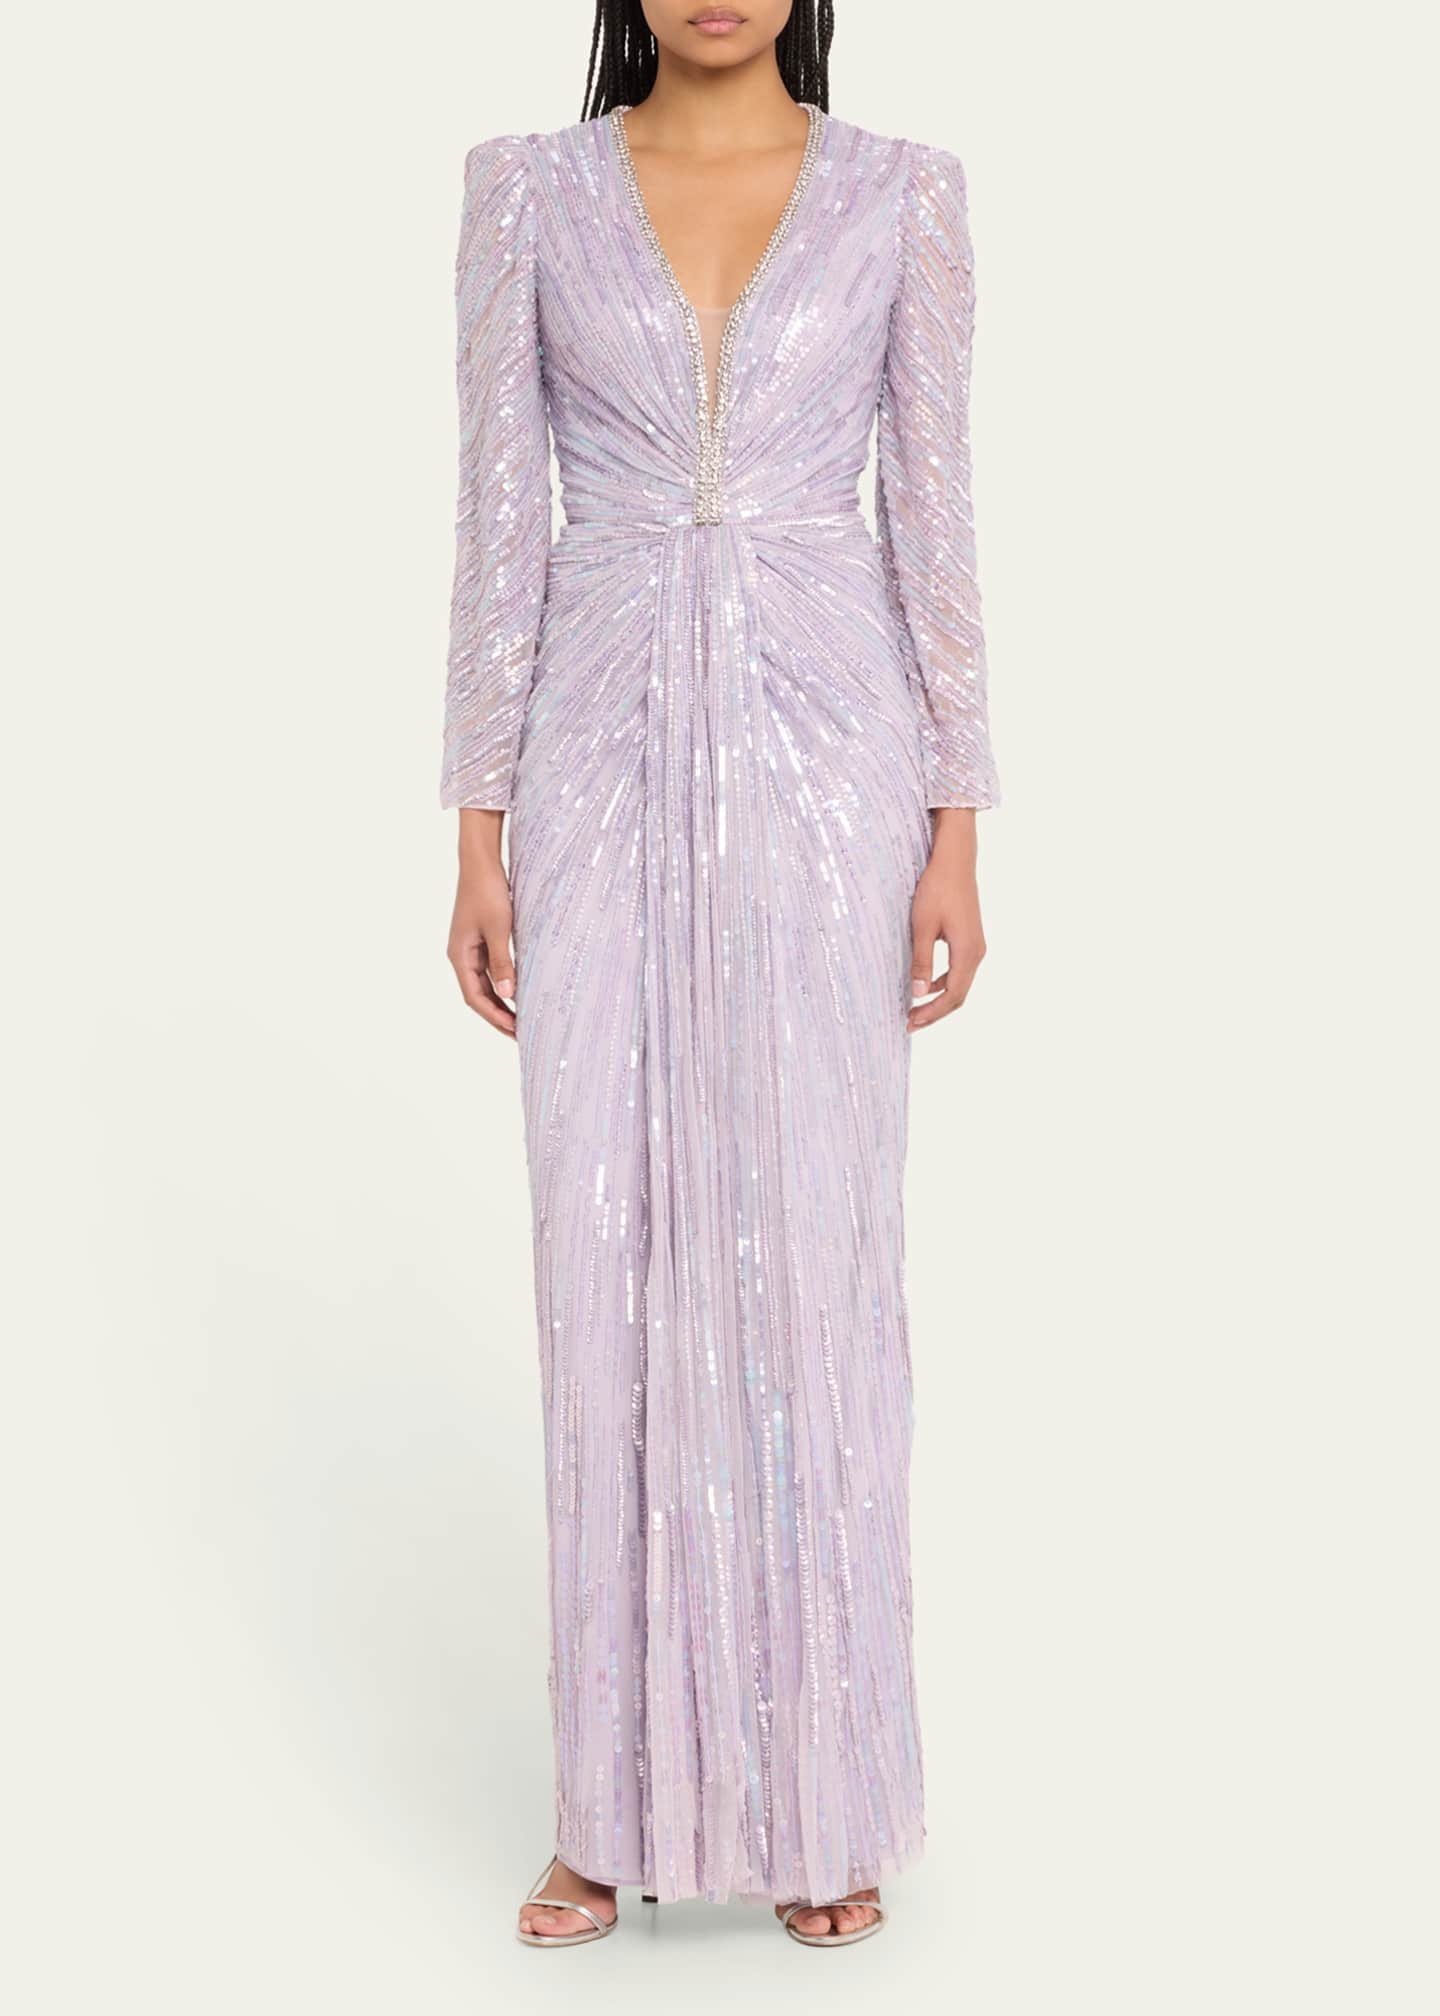 Jenny Packham Darcy Embellished Gown with Gathered Front - Bergdorf Goodman